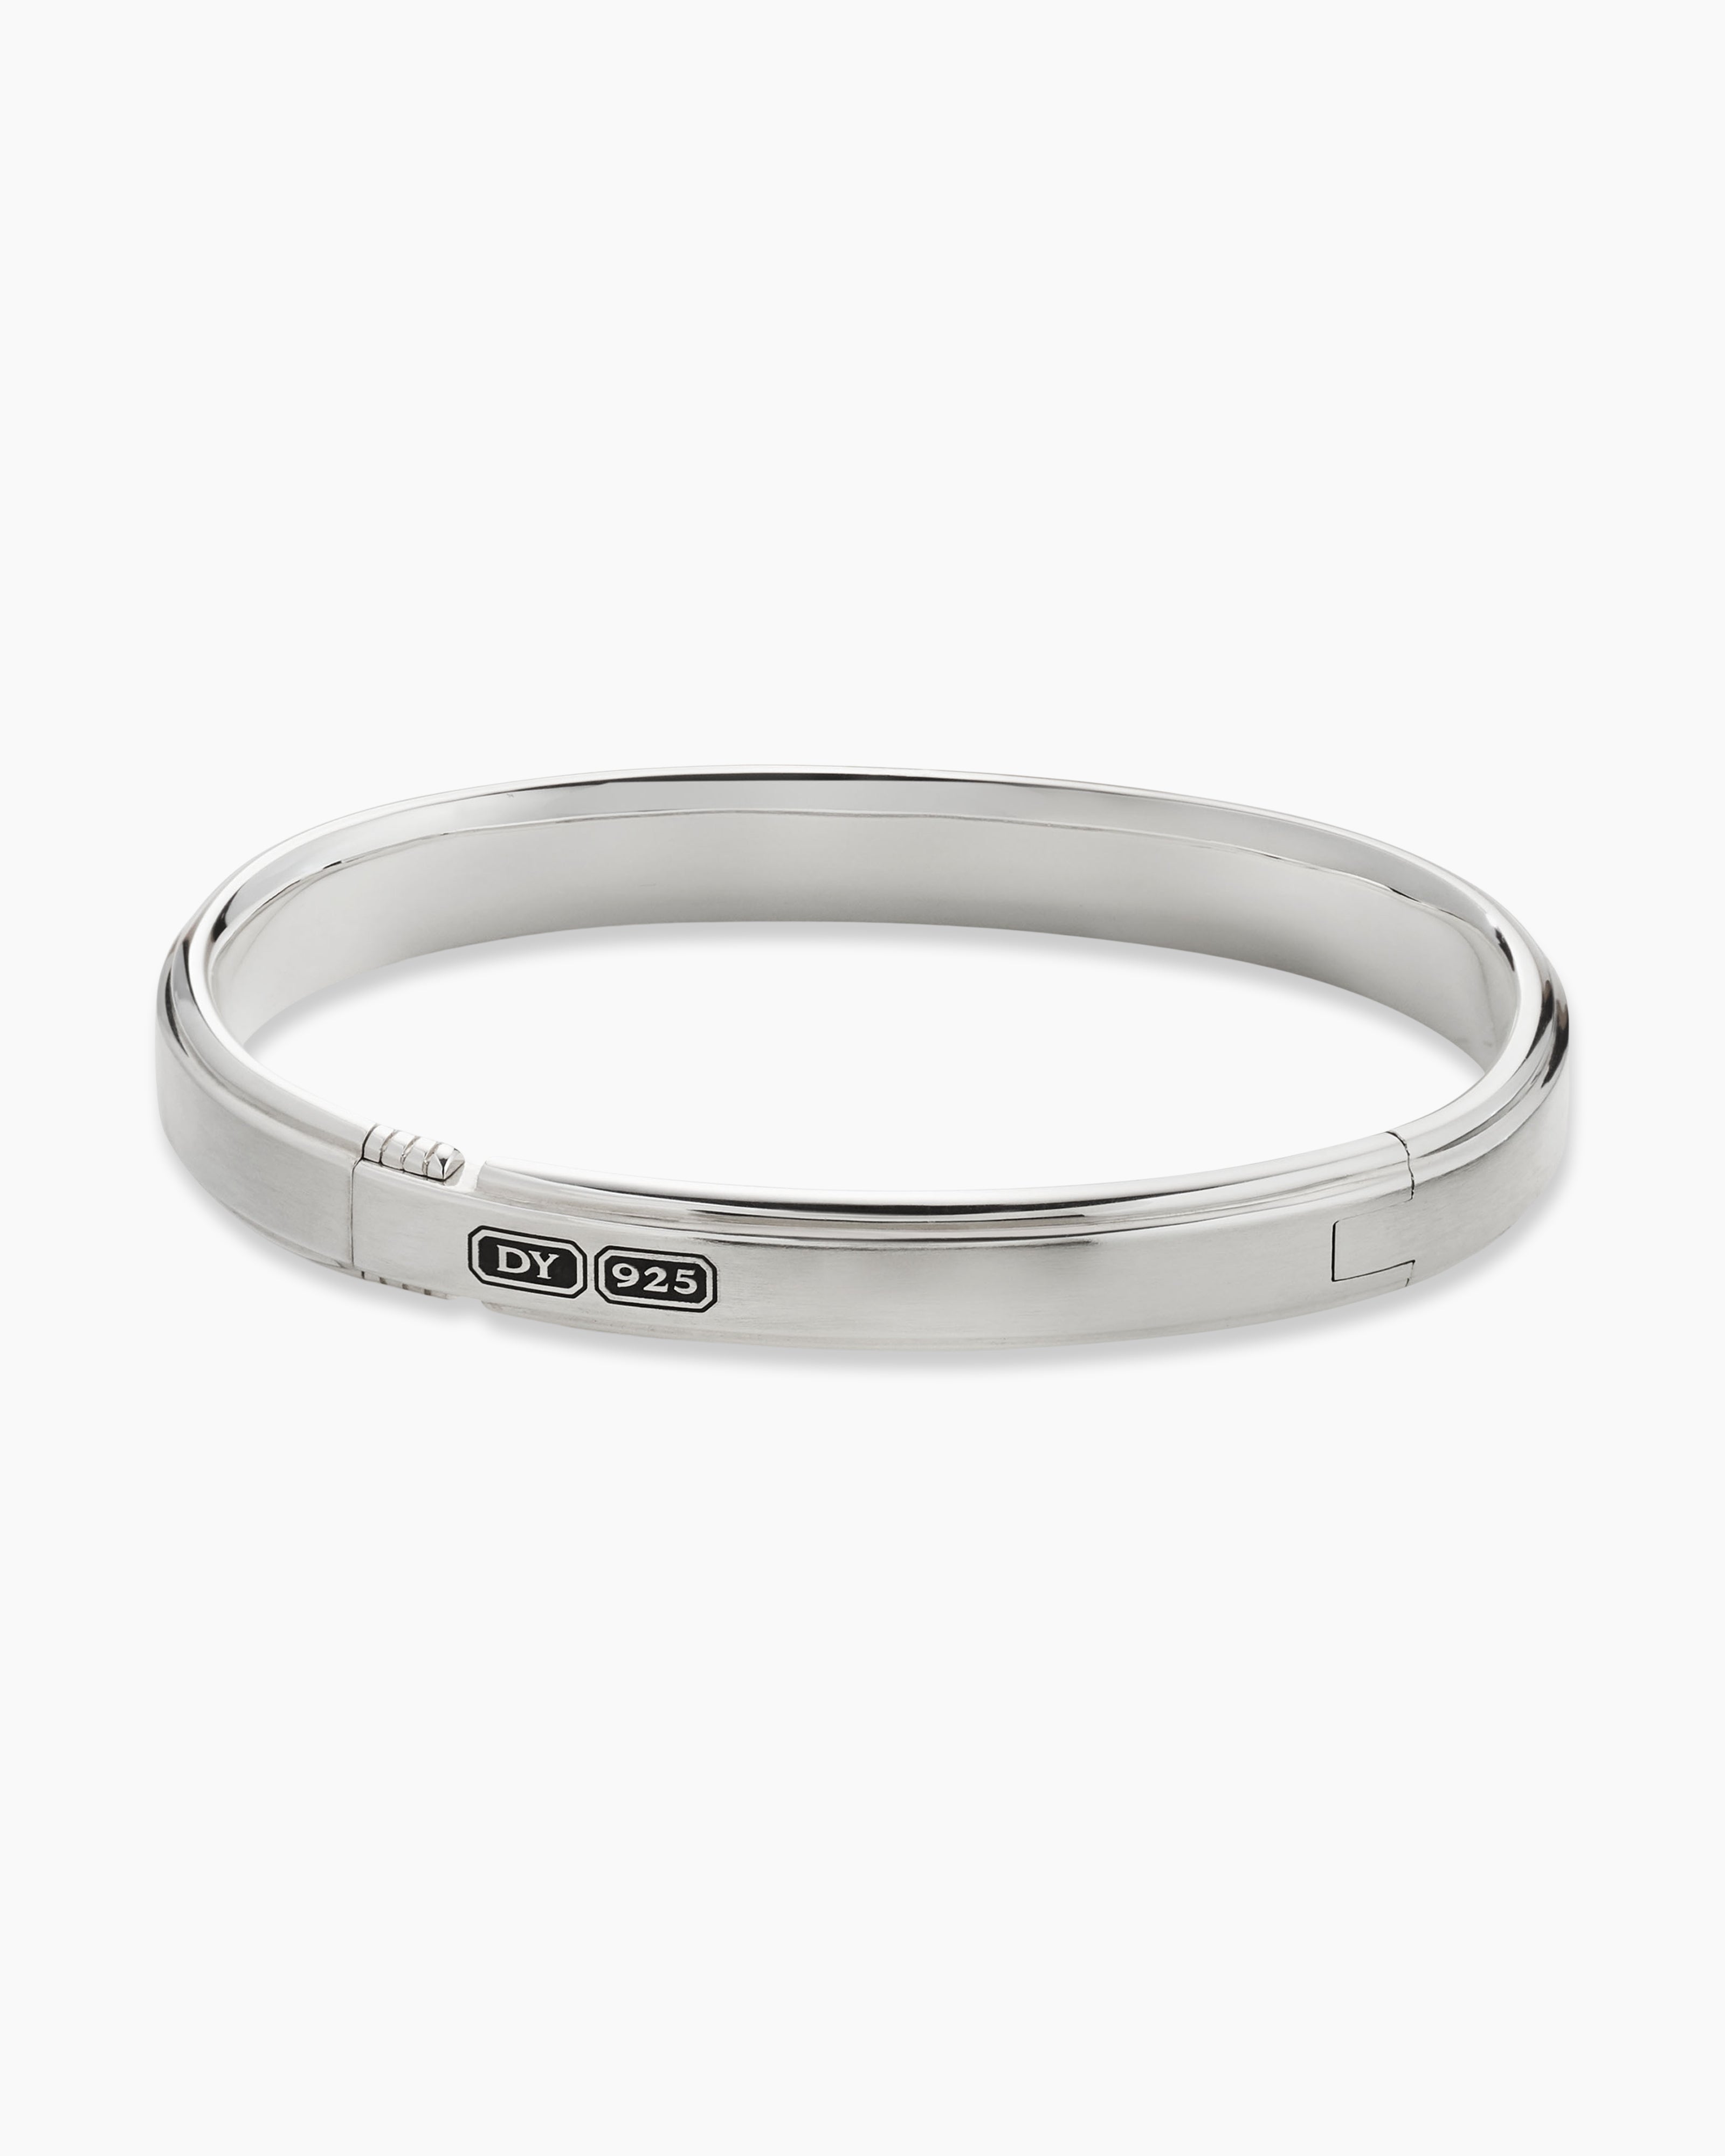 Silver Bangle for Men, Women, and Children. - VY Jewelry